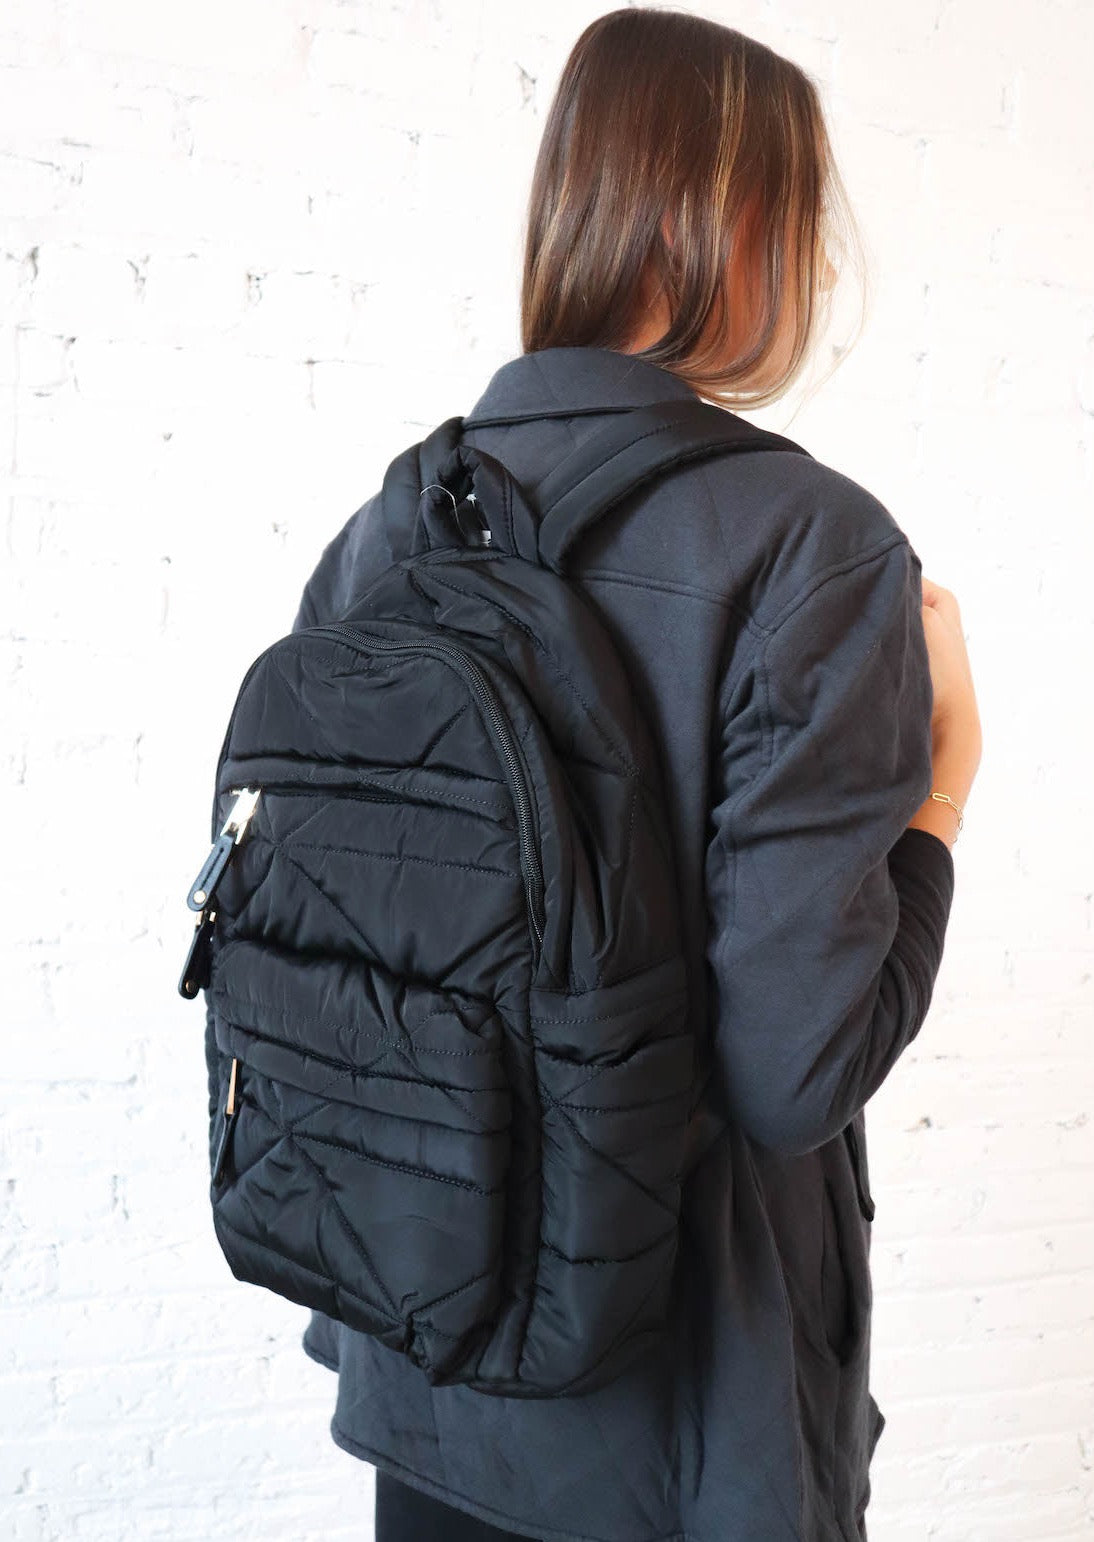 Quilted Nylon Backpack - Black